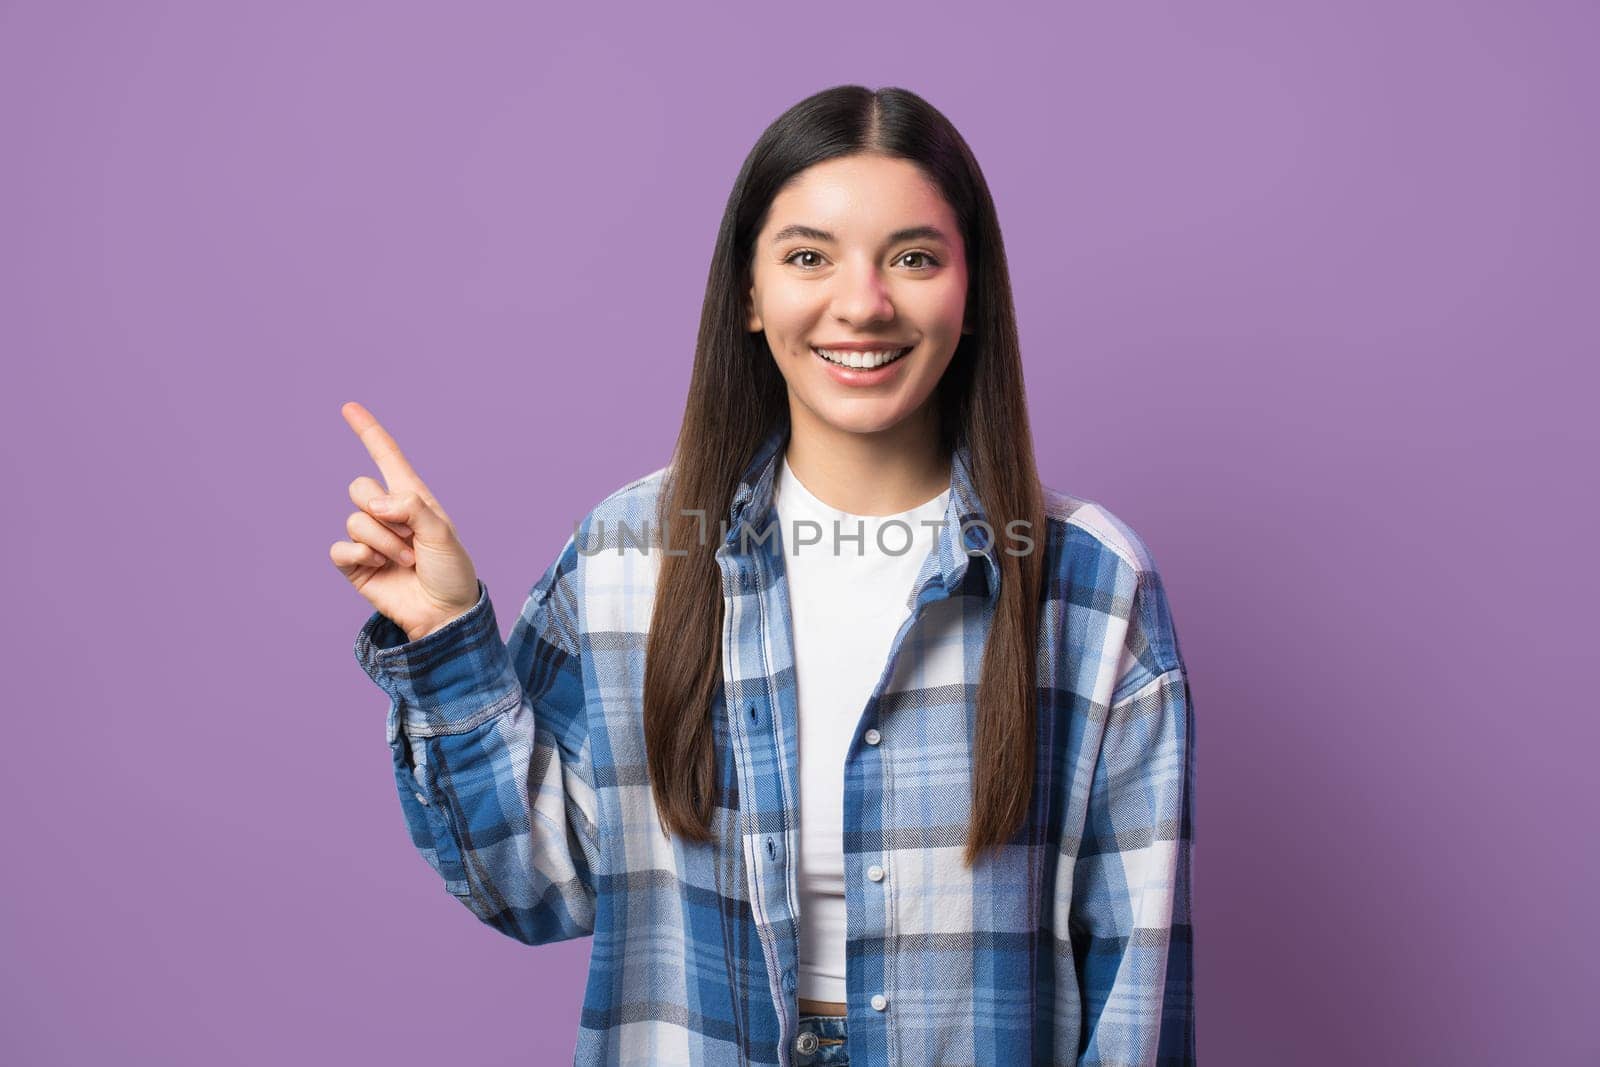 Multiethnic woman with attractive smile pointing with index finger up looking in camera against purple background.